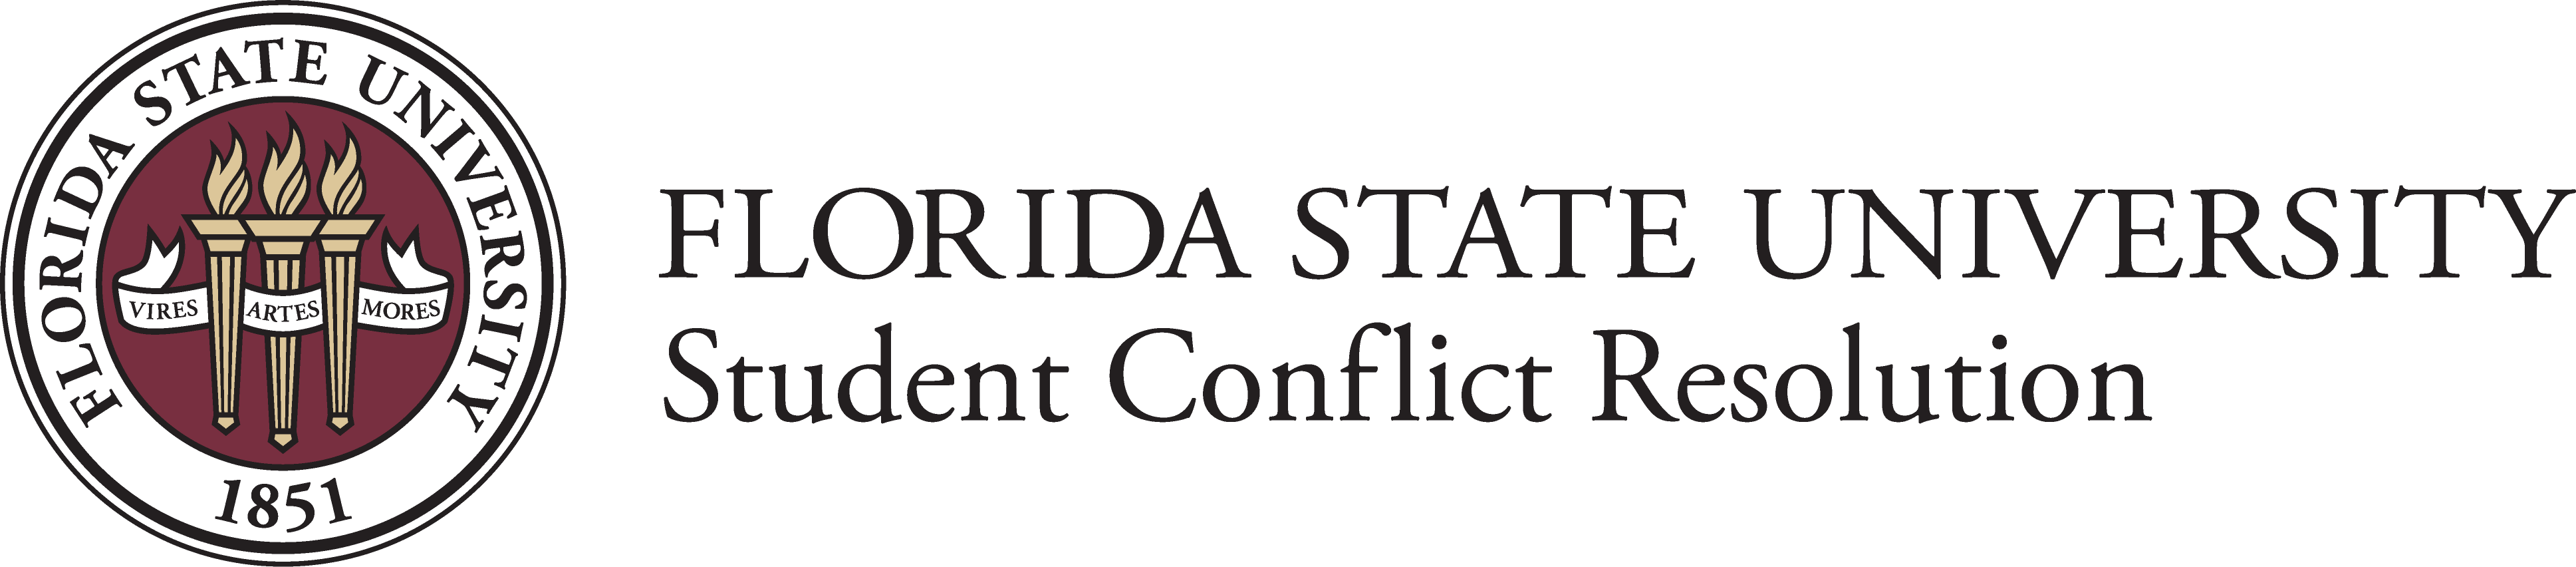 Division of Student Affairs at Florida State University Logo